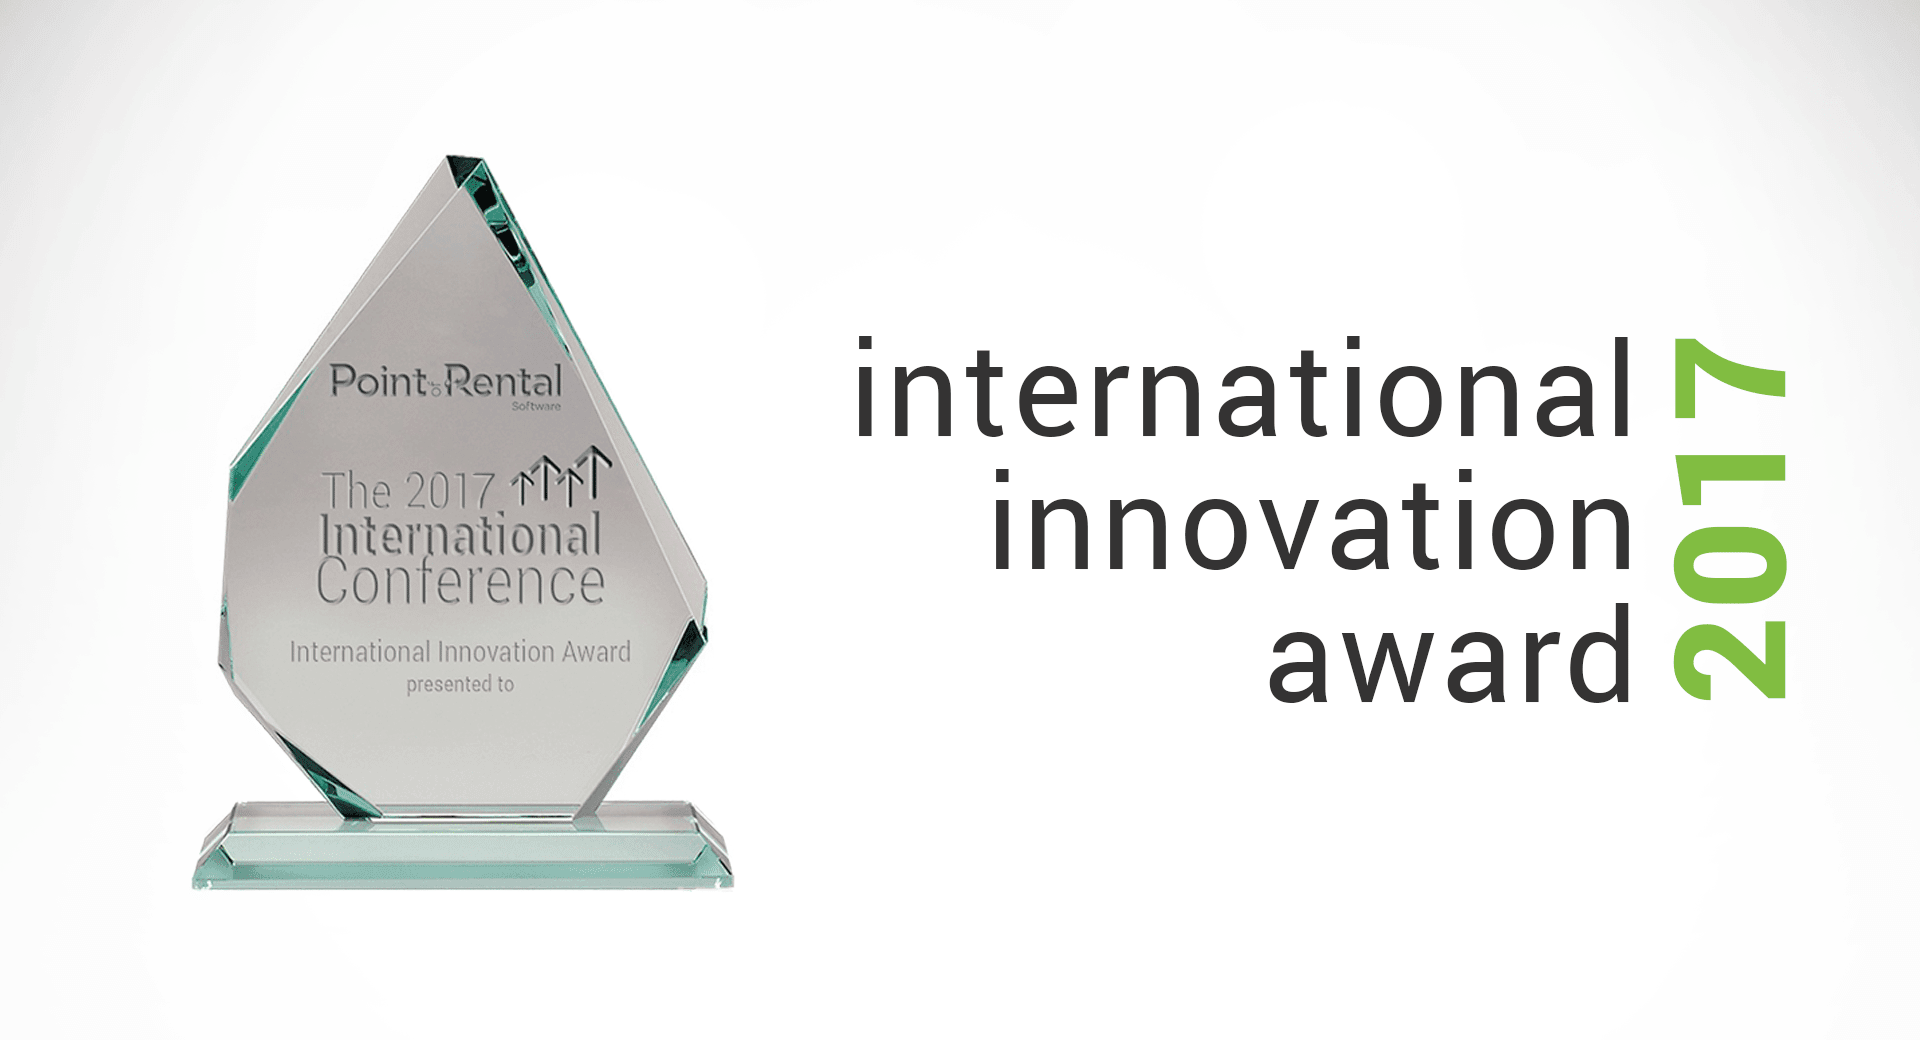 2017 International Innovation Award contestants can now submit their entries!